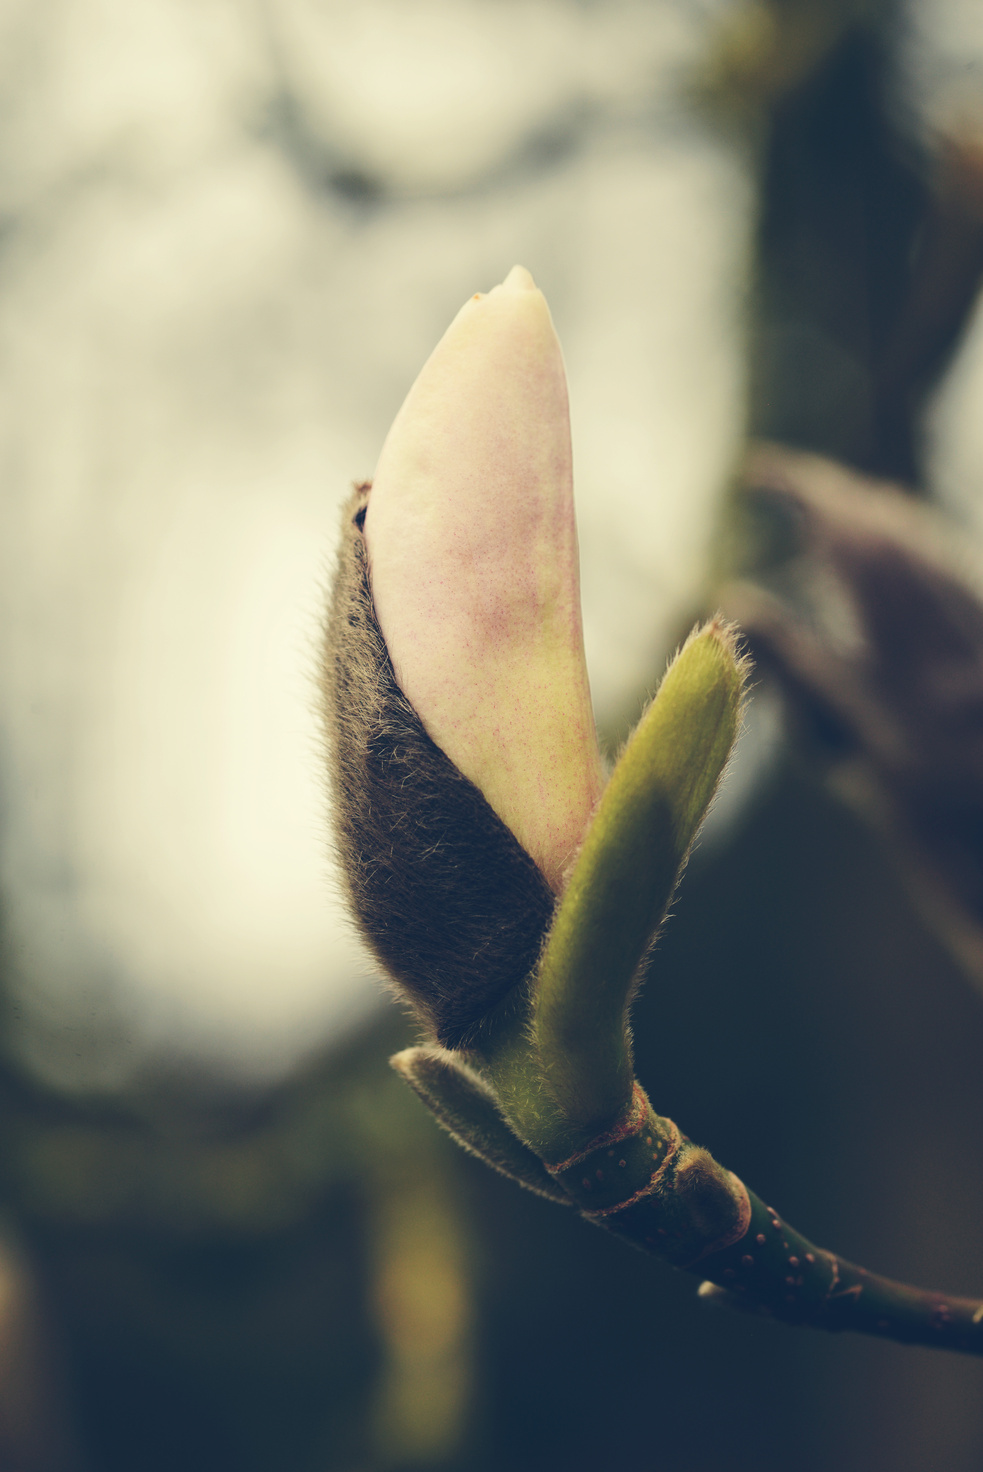 a close up of a magnolia flower bud on a tree branch